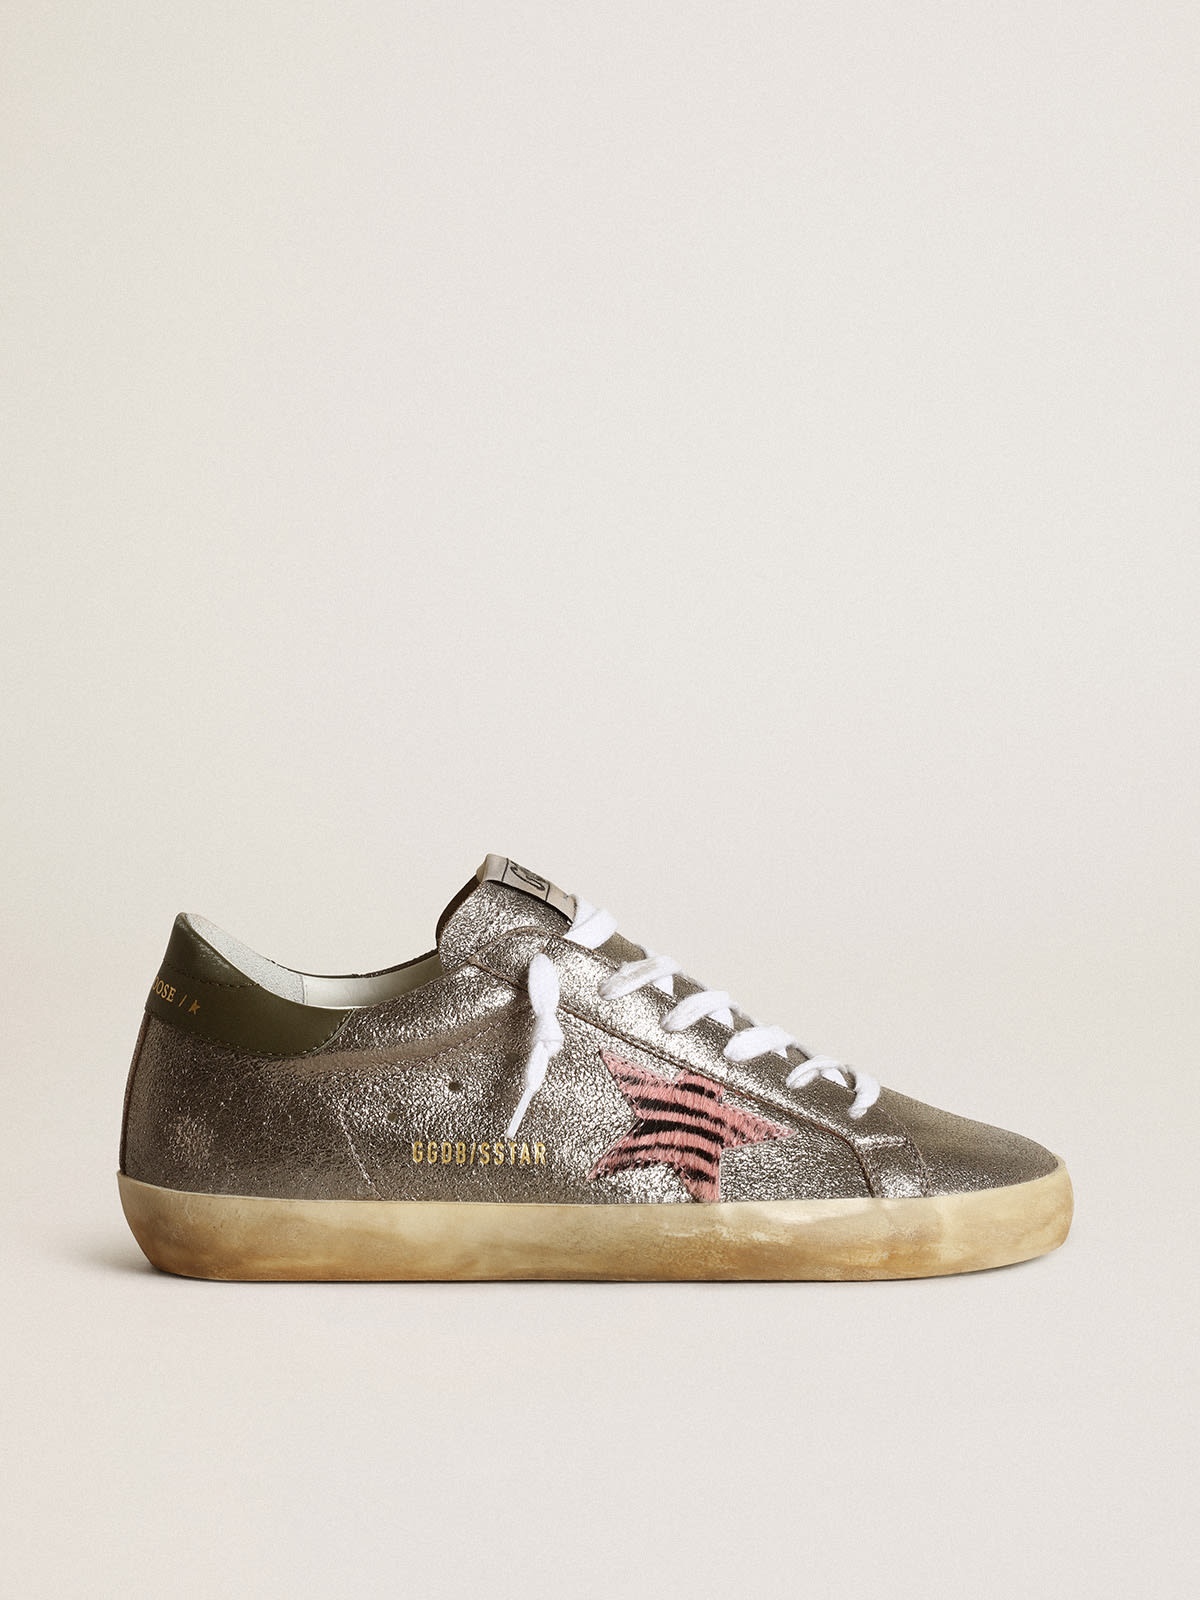 Golden Goose Super-Star LTD in gray laminated suede with a pony skin star |  REVERSIBLE